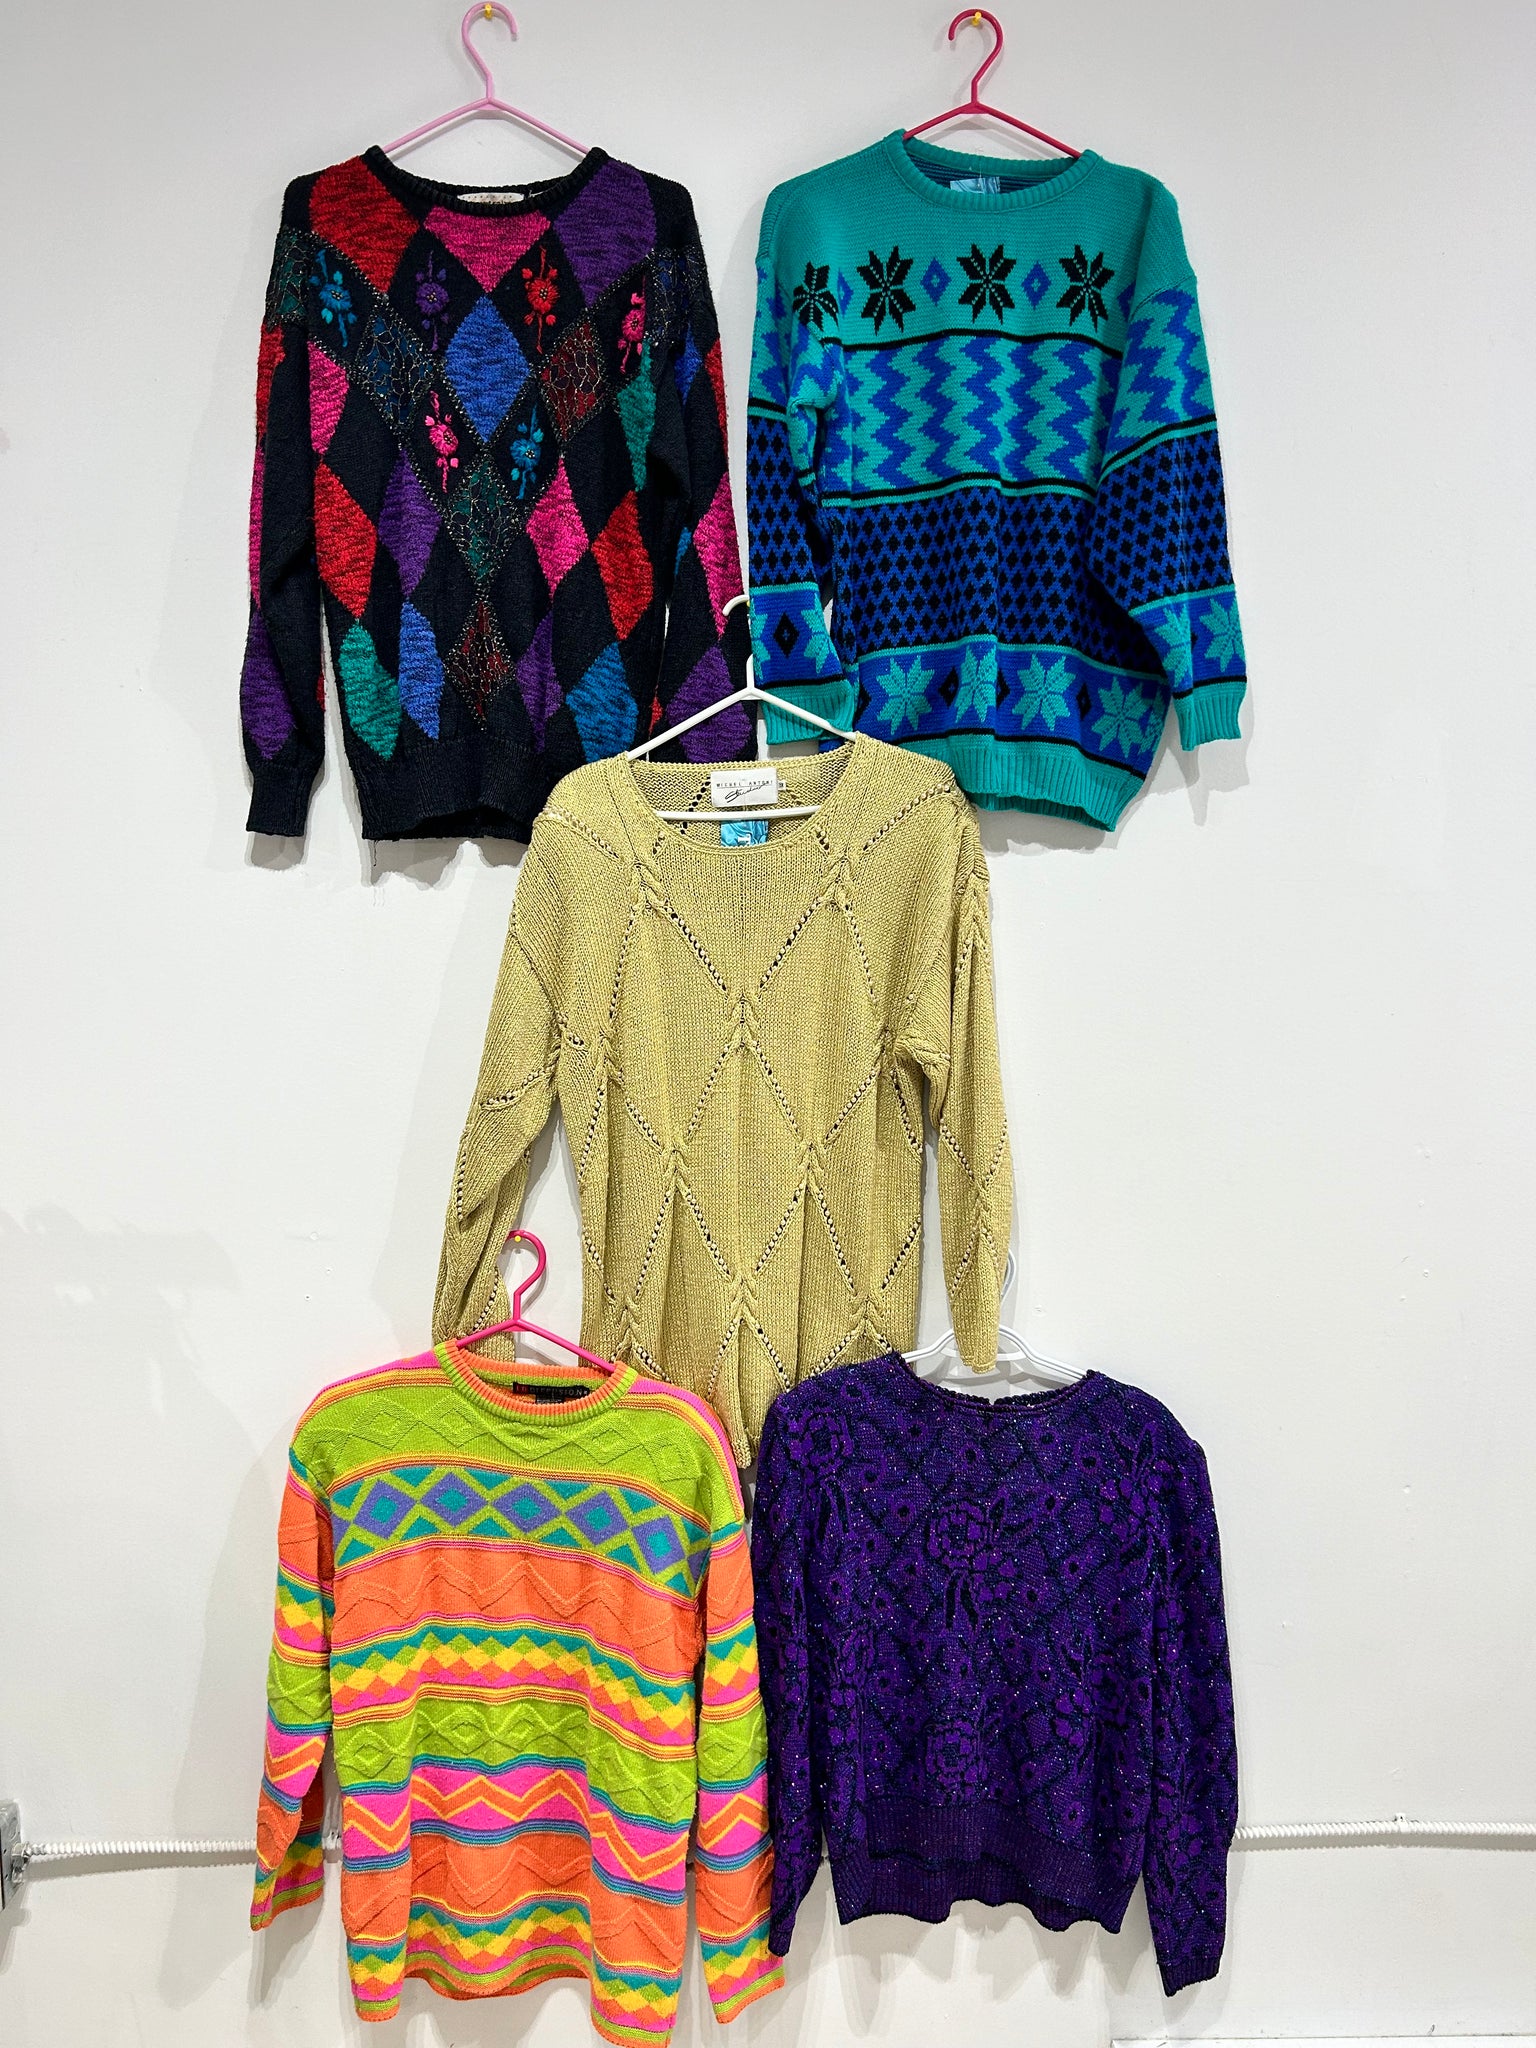 Thrifted vintage & pre-loved knitted sweaters part 1